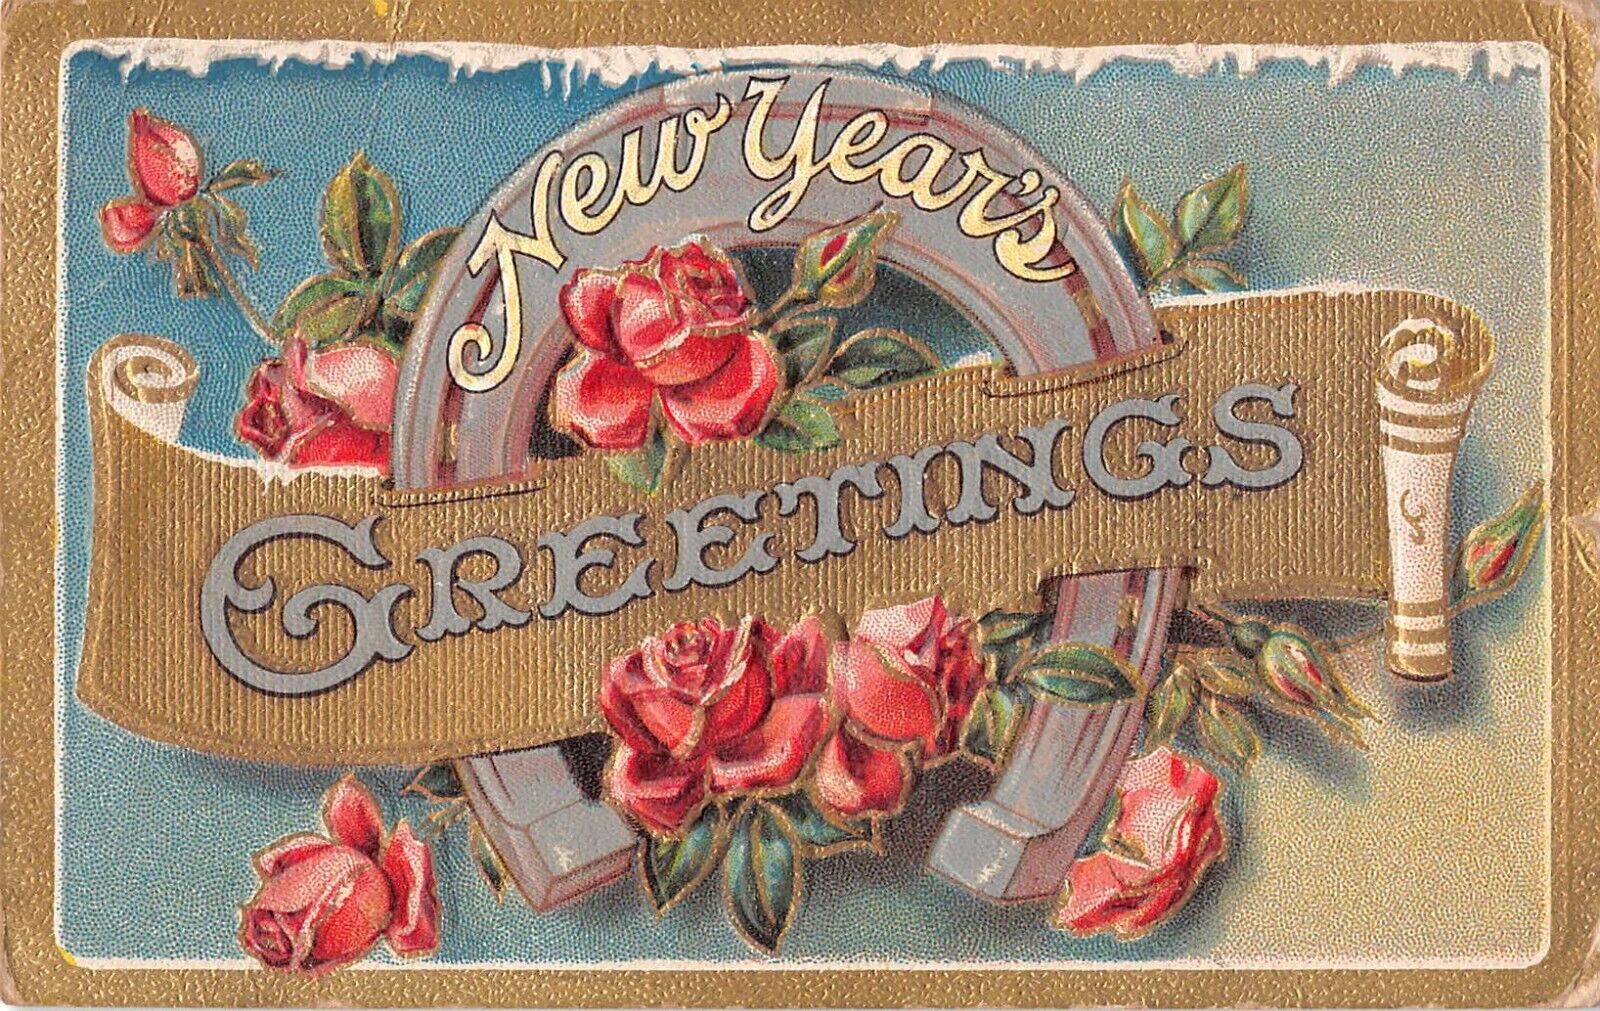 1912 New Year PC of Pink Roses With a Scroll & a Horseshoe-Good Luck NY Ser No.1